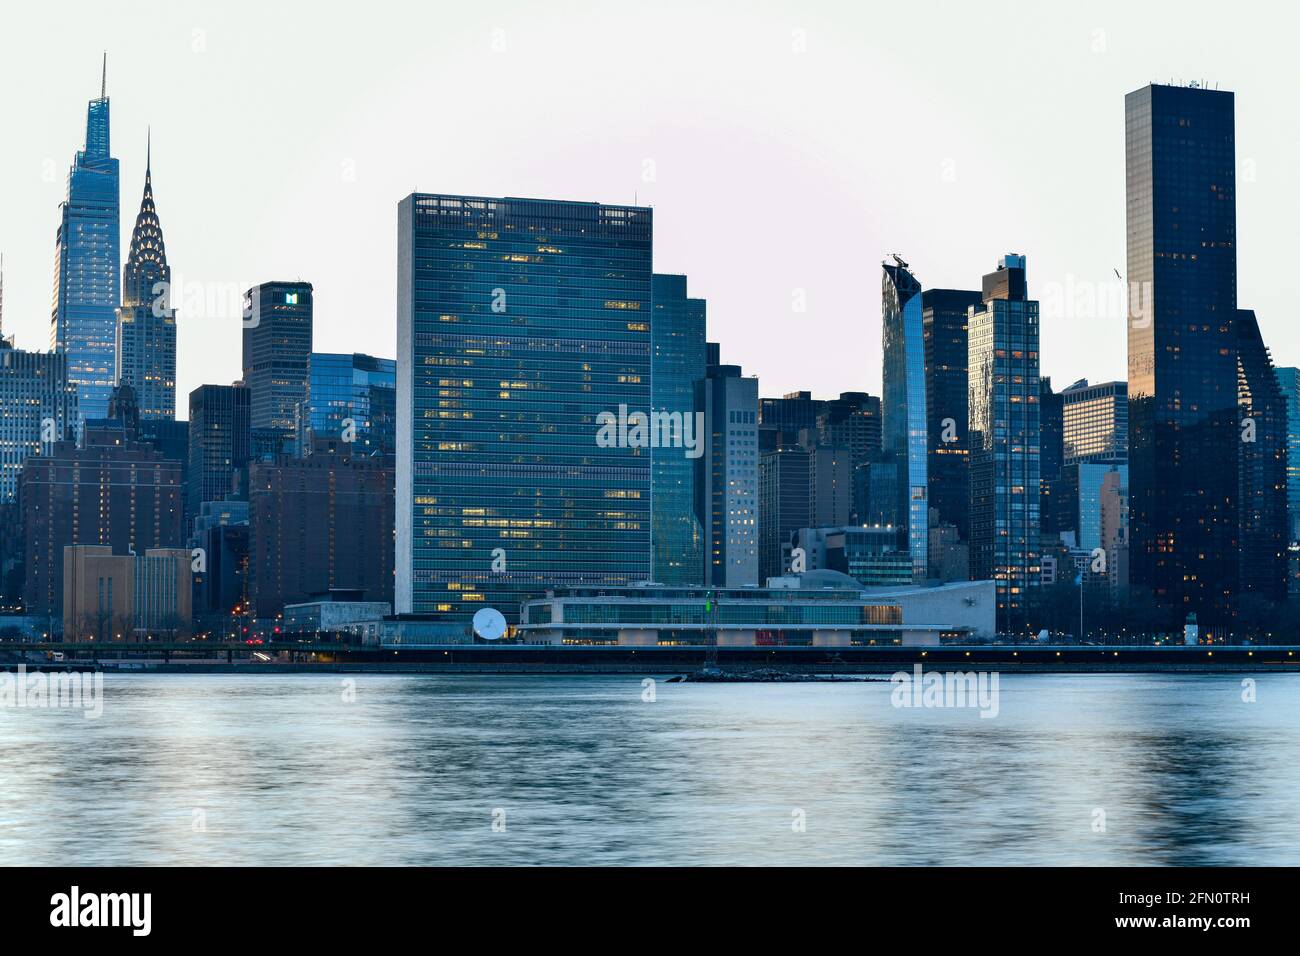 New York City - Apr 7, 2021: View of Midtown Manhattan at sunset from Long Island City, Queens, New York City. Stock Photo